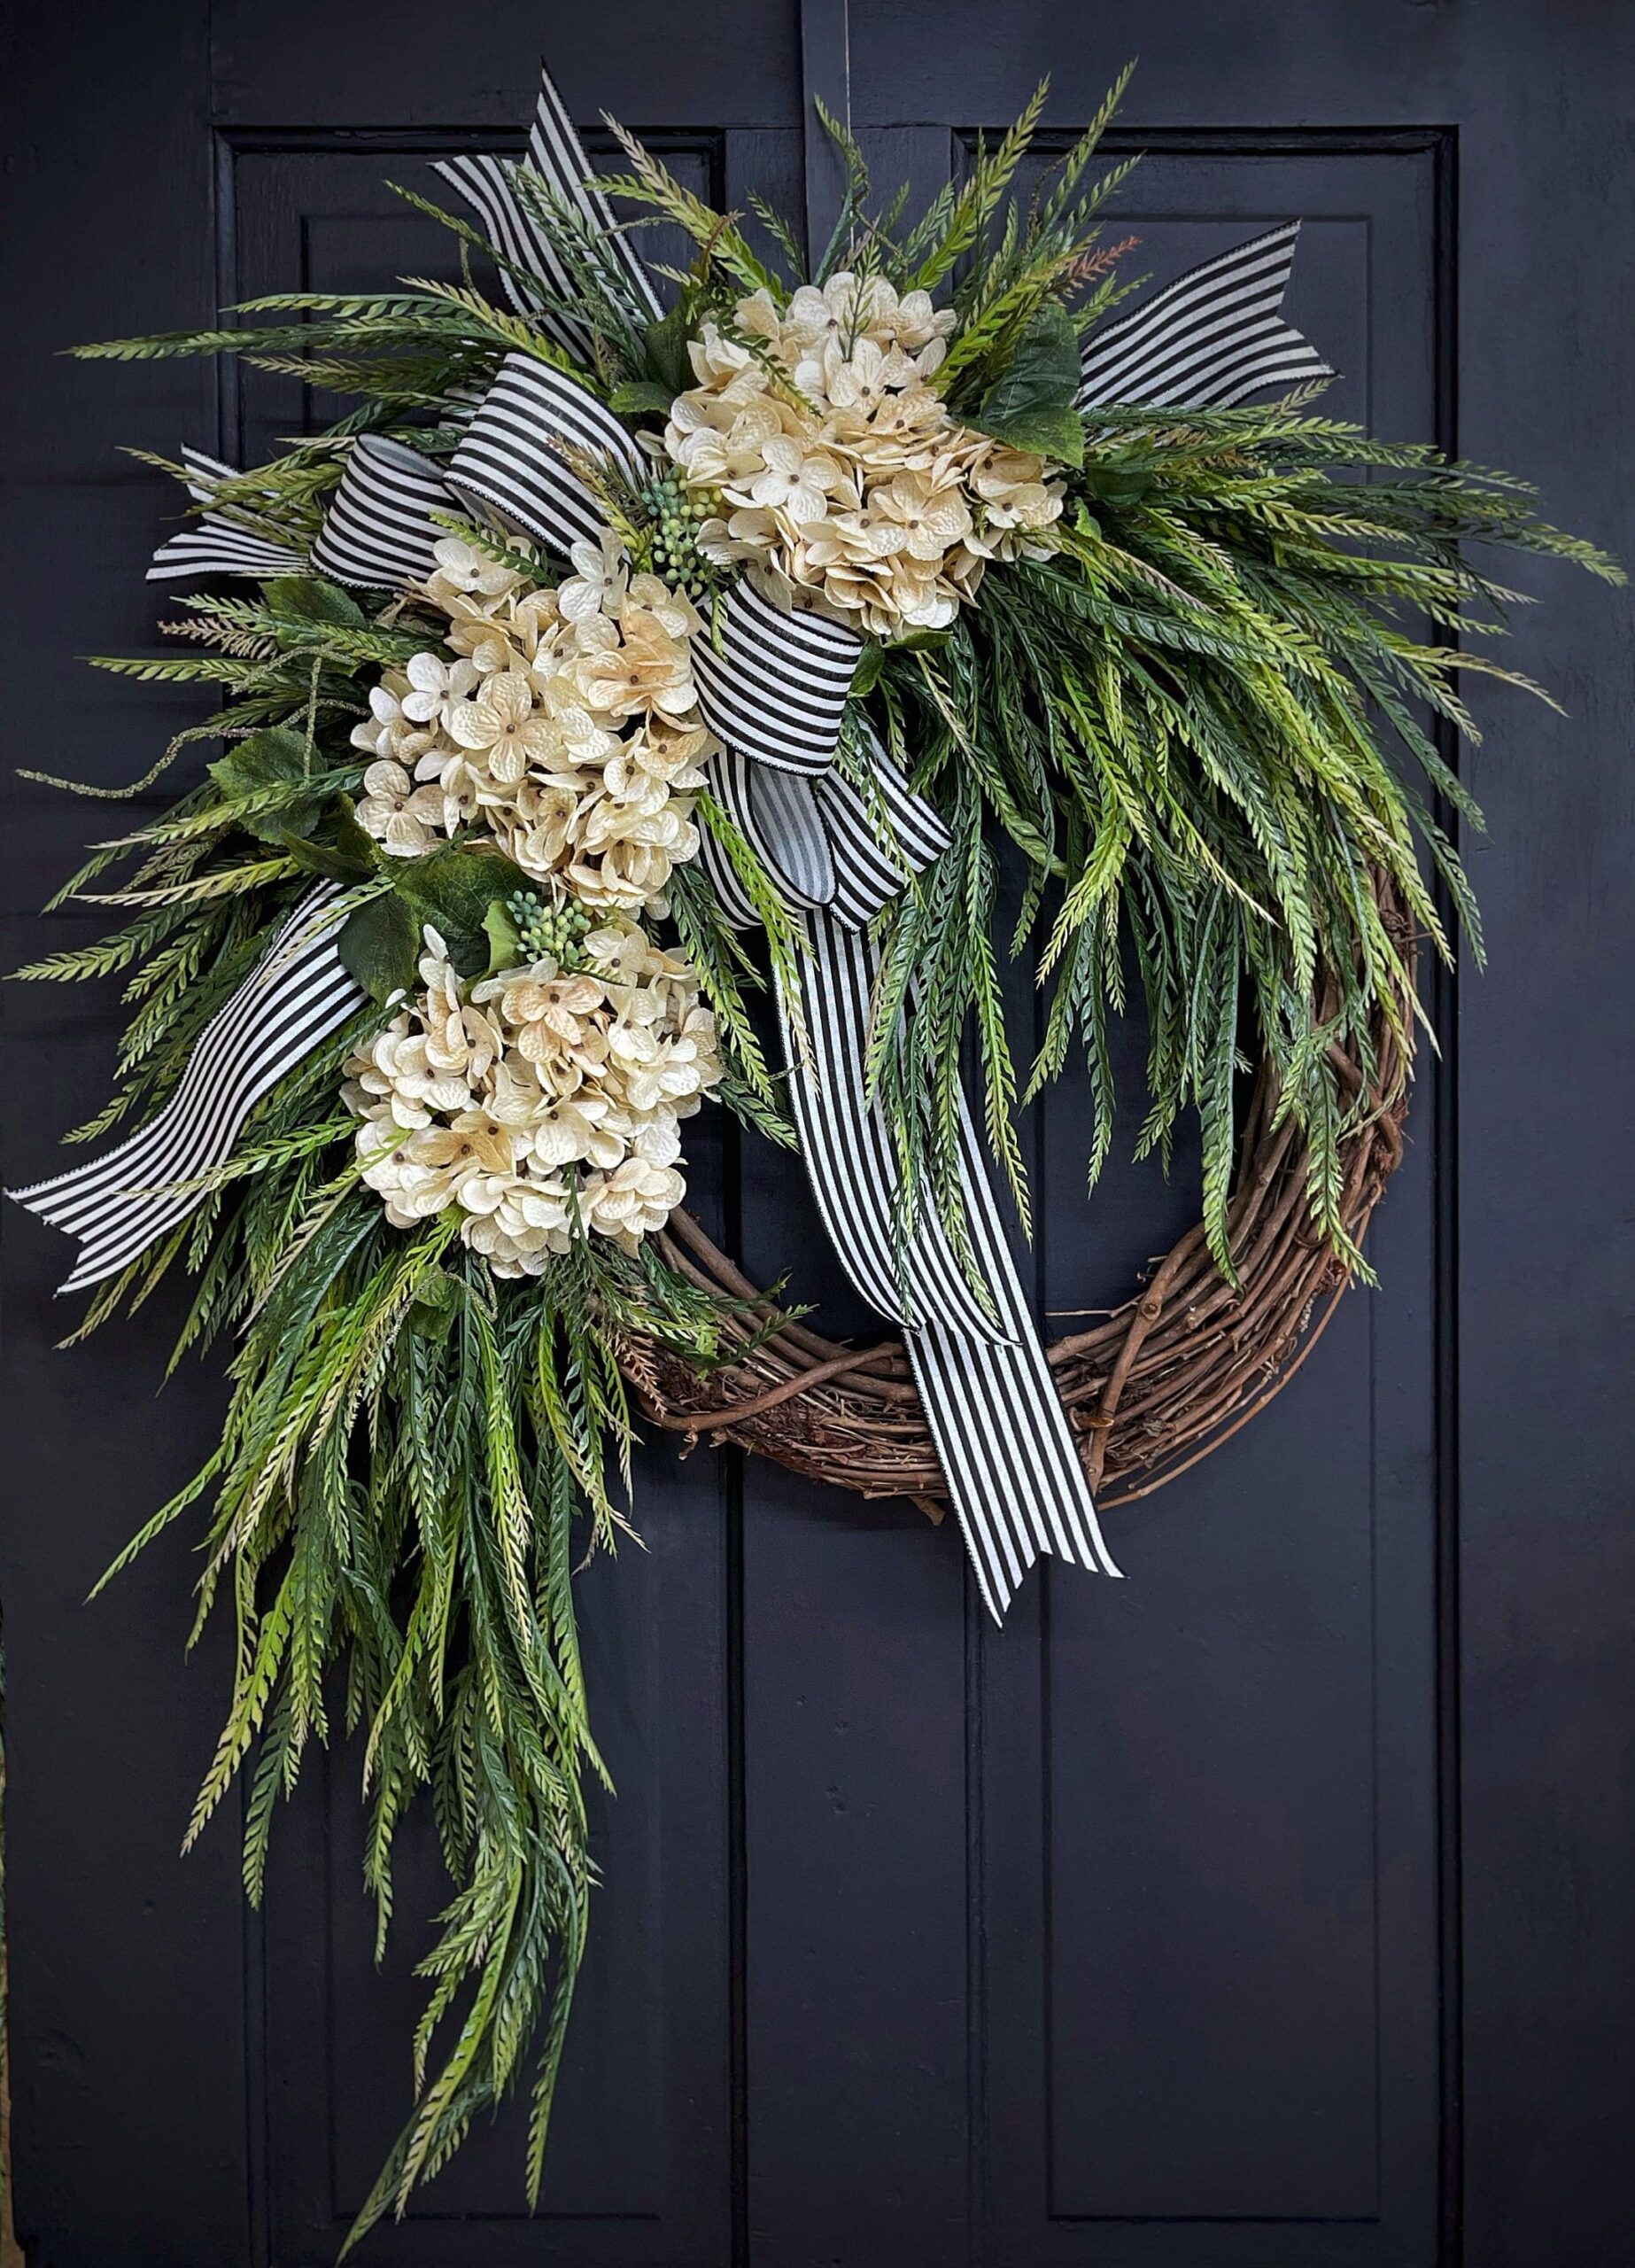 Holiday Wreaths Door Decor Festive Ways to Beautify Your Entryway for the Holidays